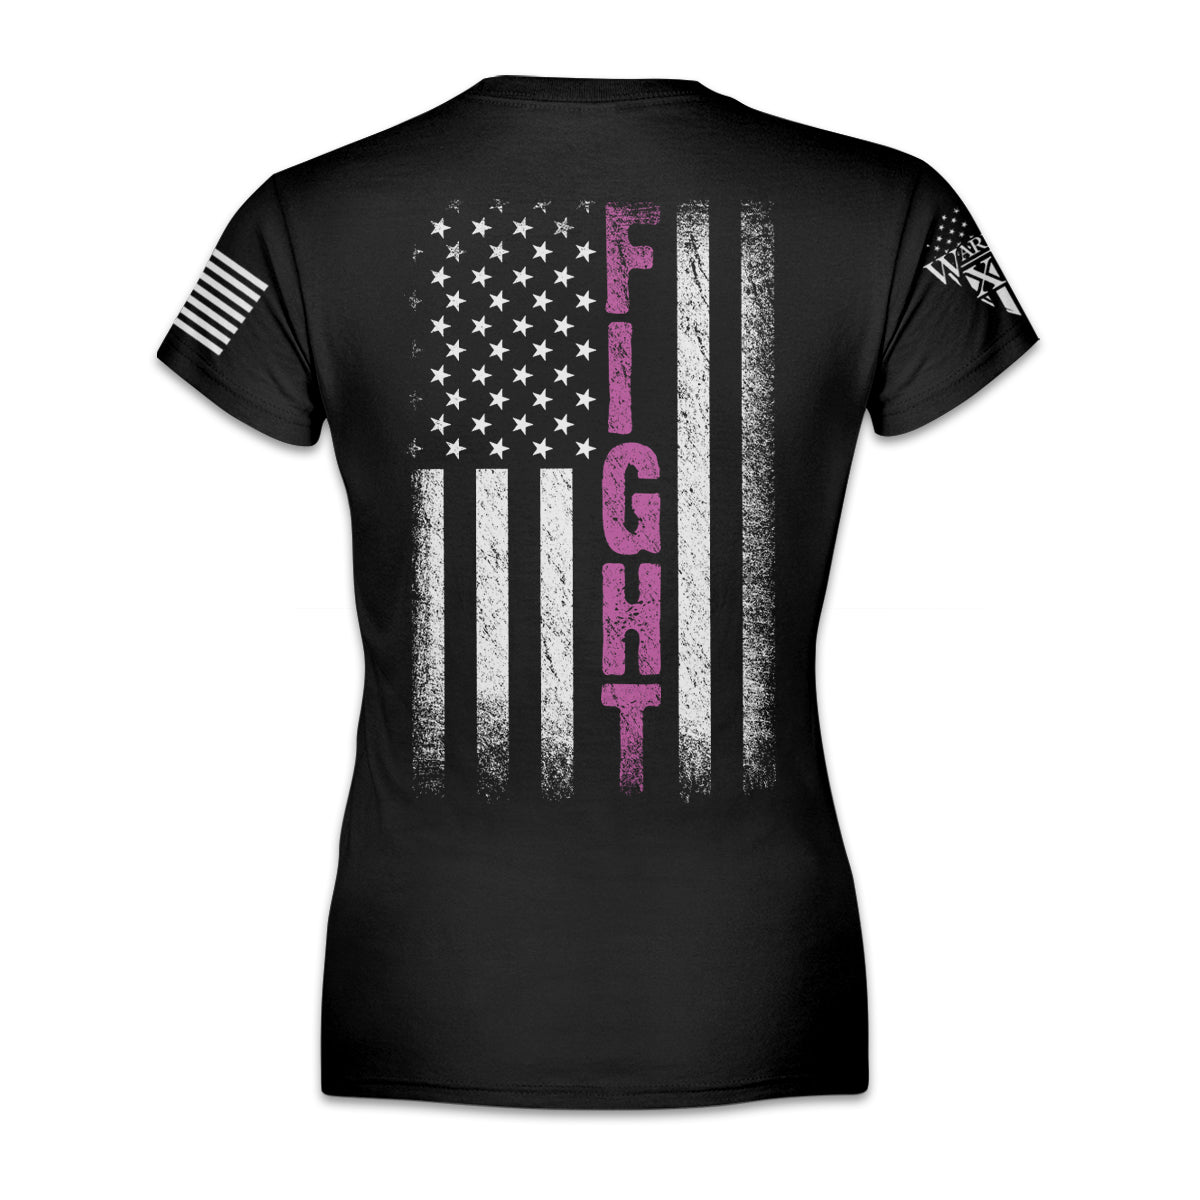 A women's black t-shirt with the words "Fight" within an American flag printed on the back of the shirt for breast cancer awareness.